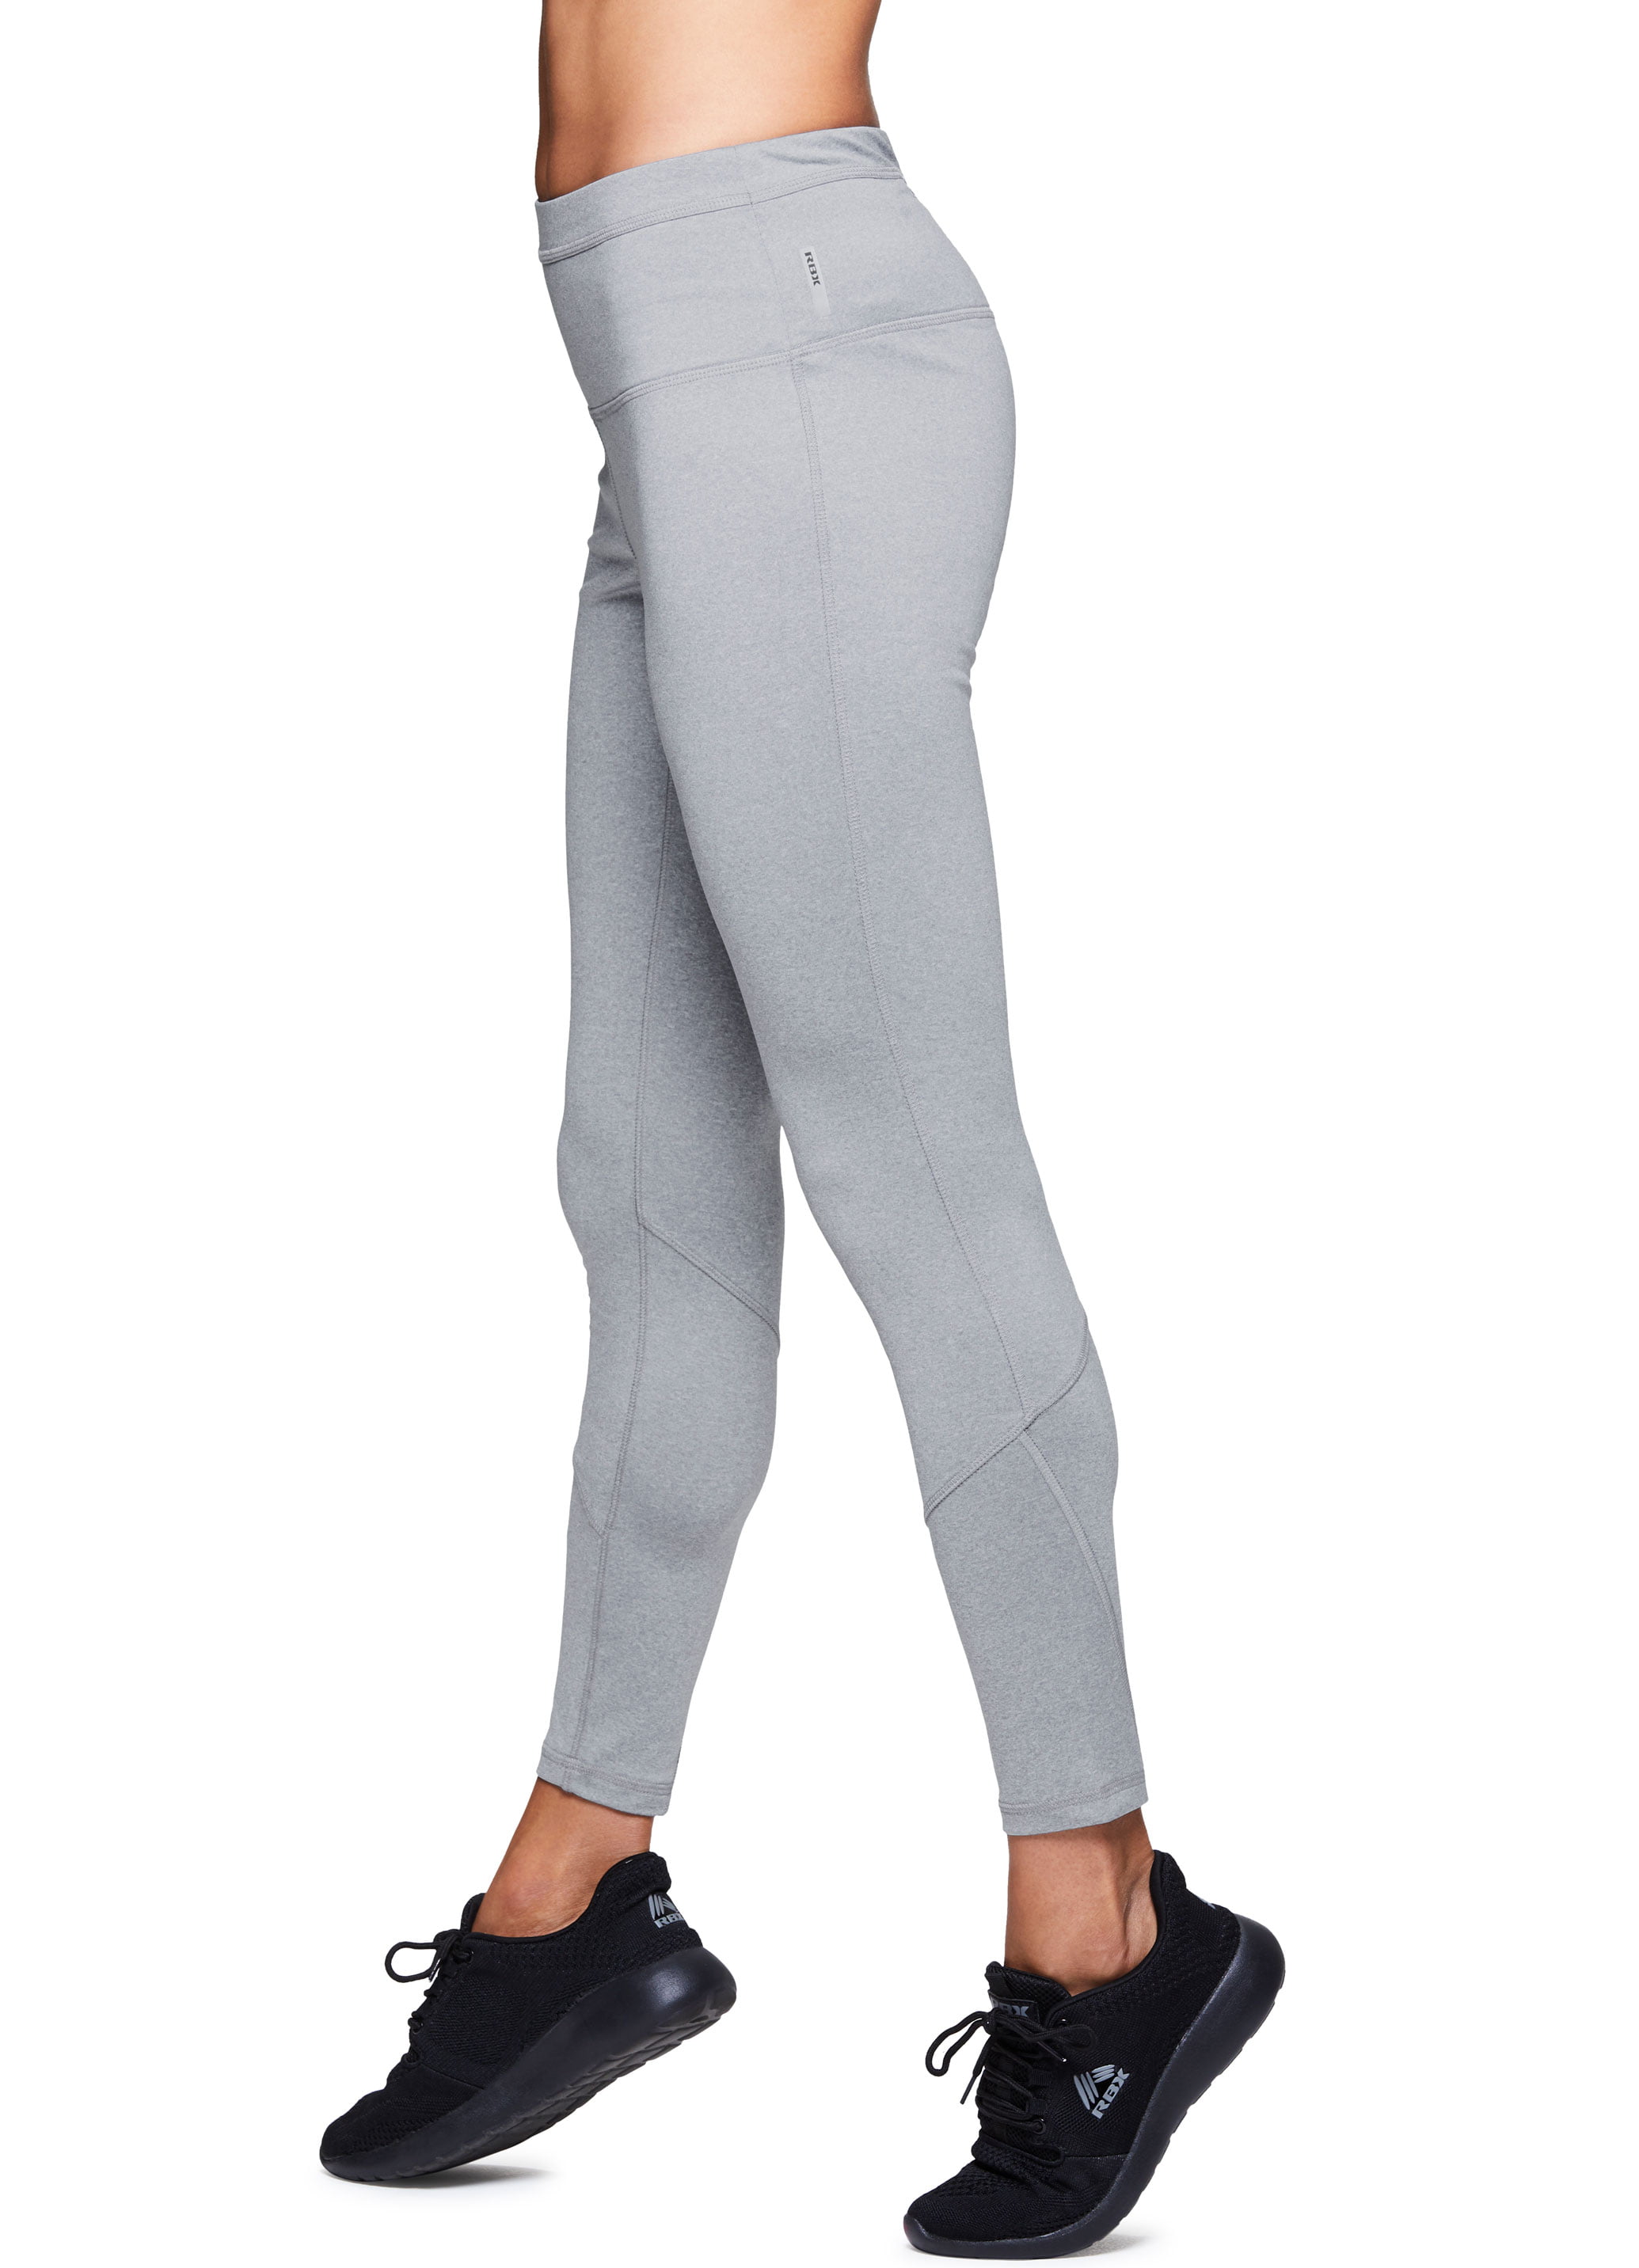 RBX - RBX Active Women's Fleece Lined Full Length Athletic Training ...